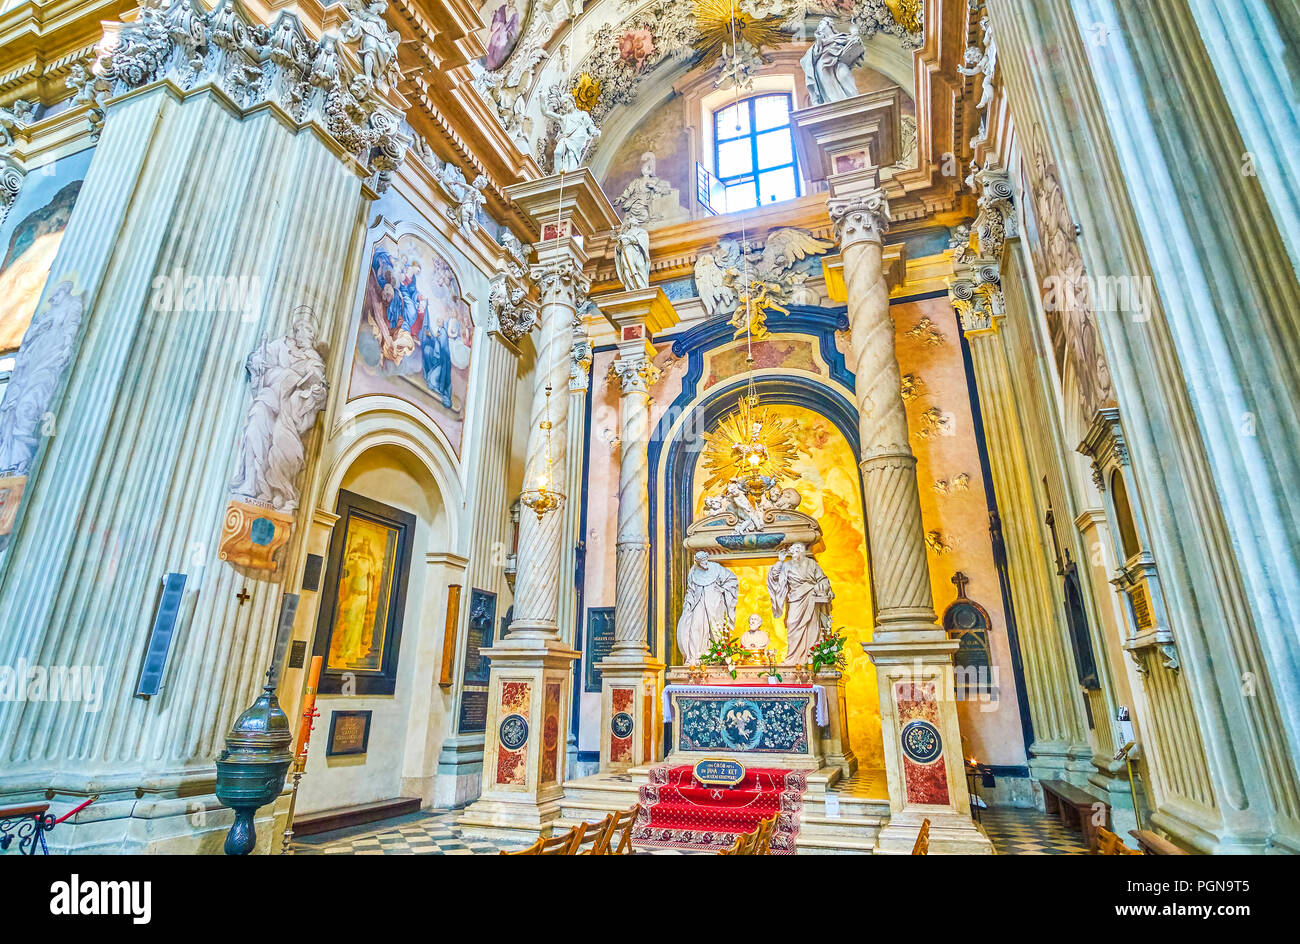 KRAKOW, POLAND - JUNE 11, 2018: The small chapel inside St Anna Church dedicated to Saint John Cantius, decorated with sculptures and carved plaster,  Stock Photo